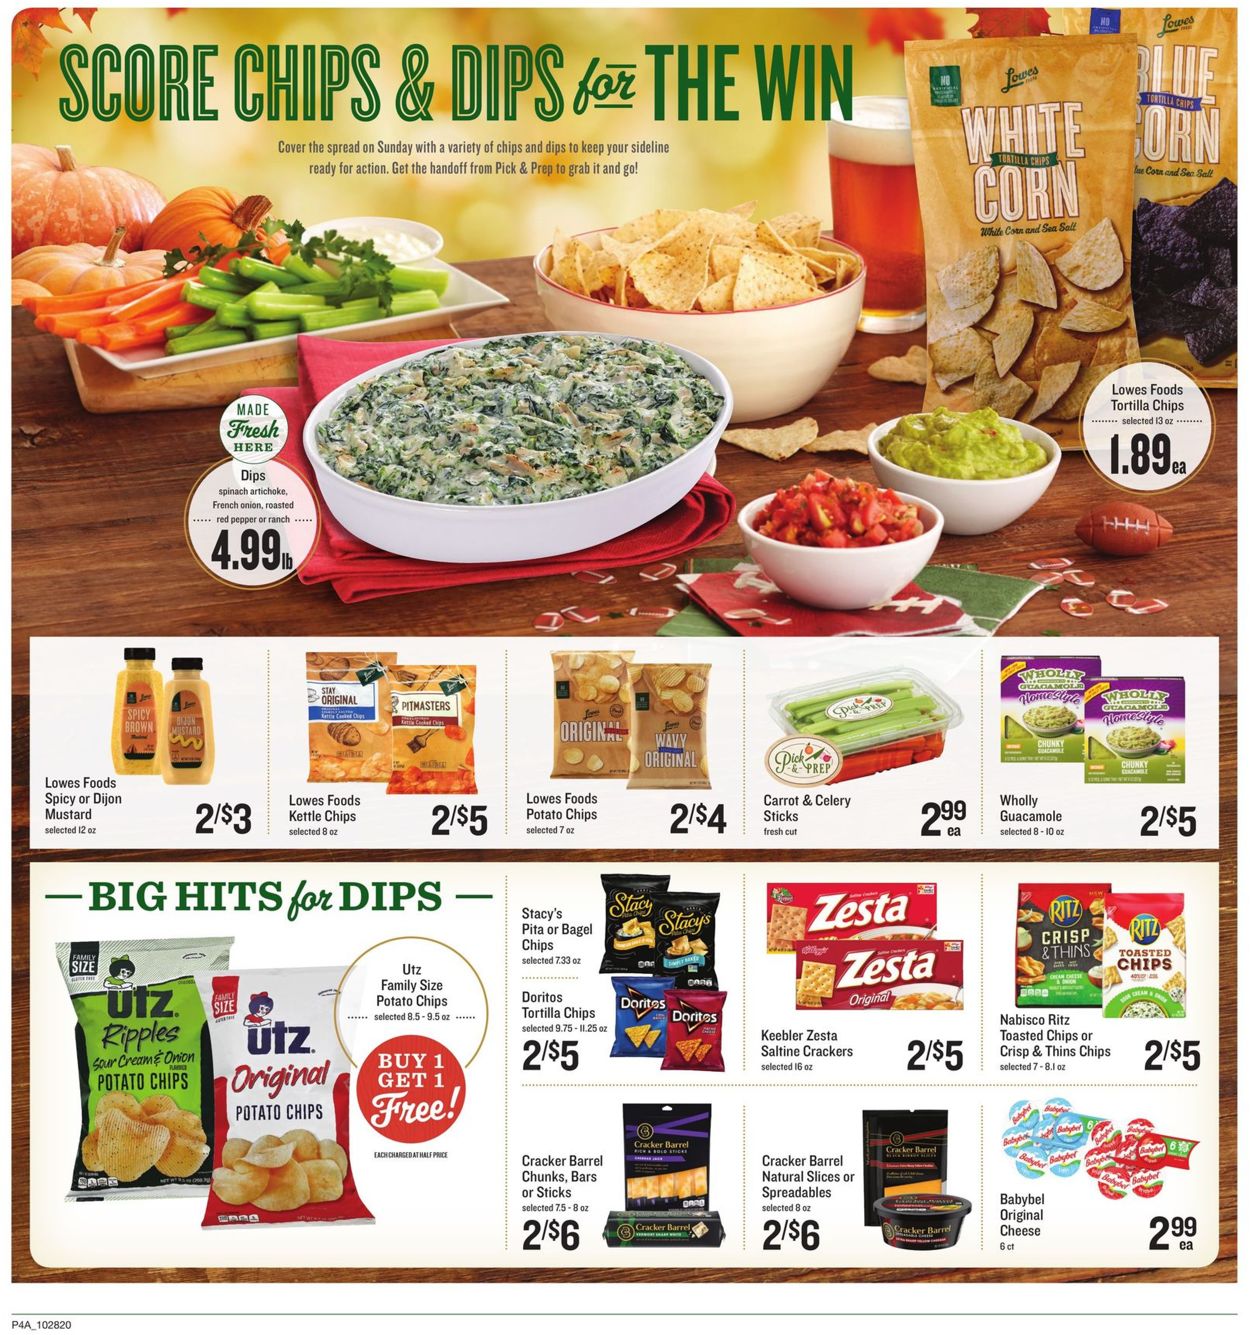 Lowes Foods Current weekly ad 10/28 11/03/2020 [5]